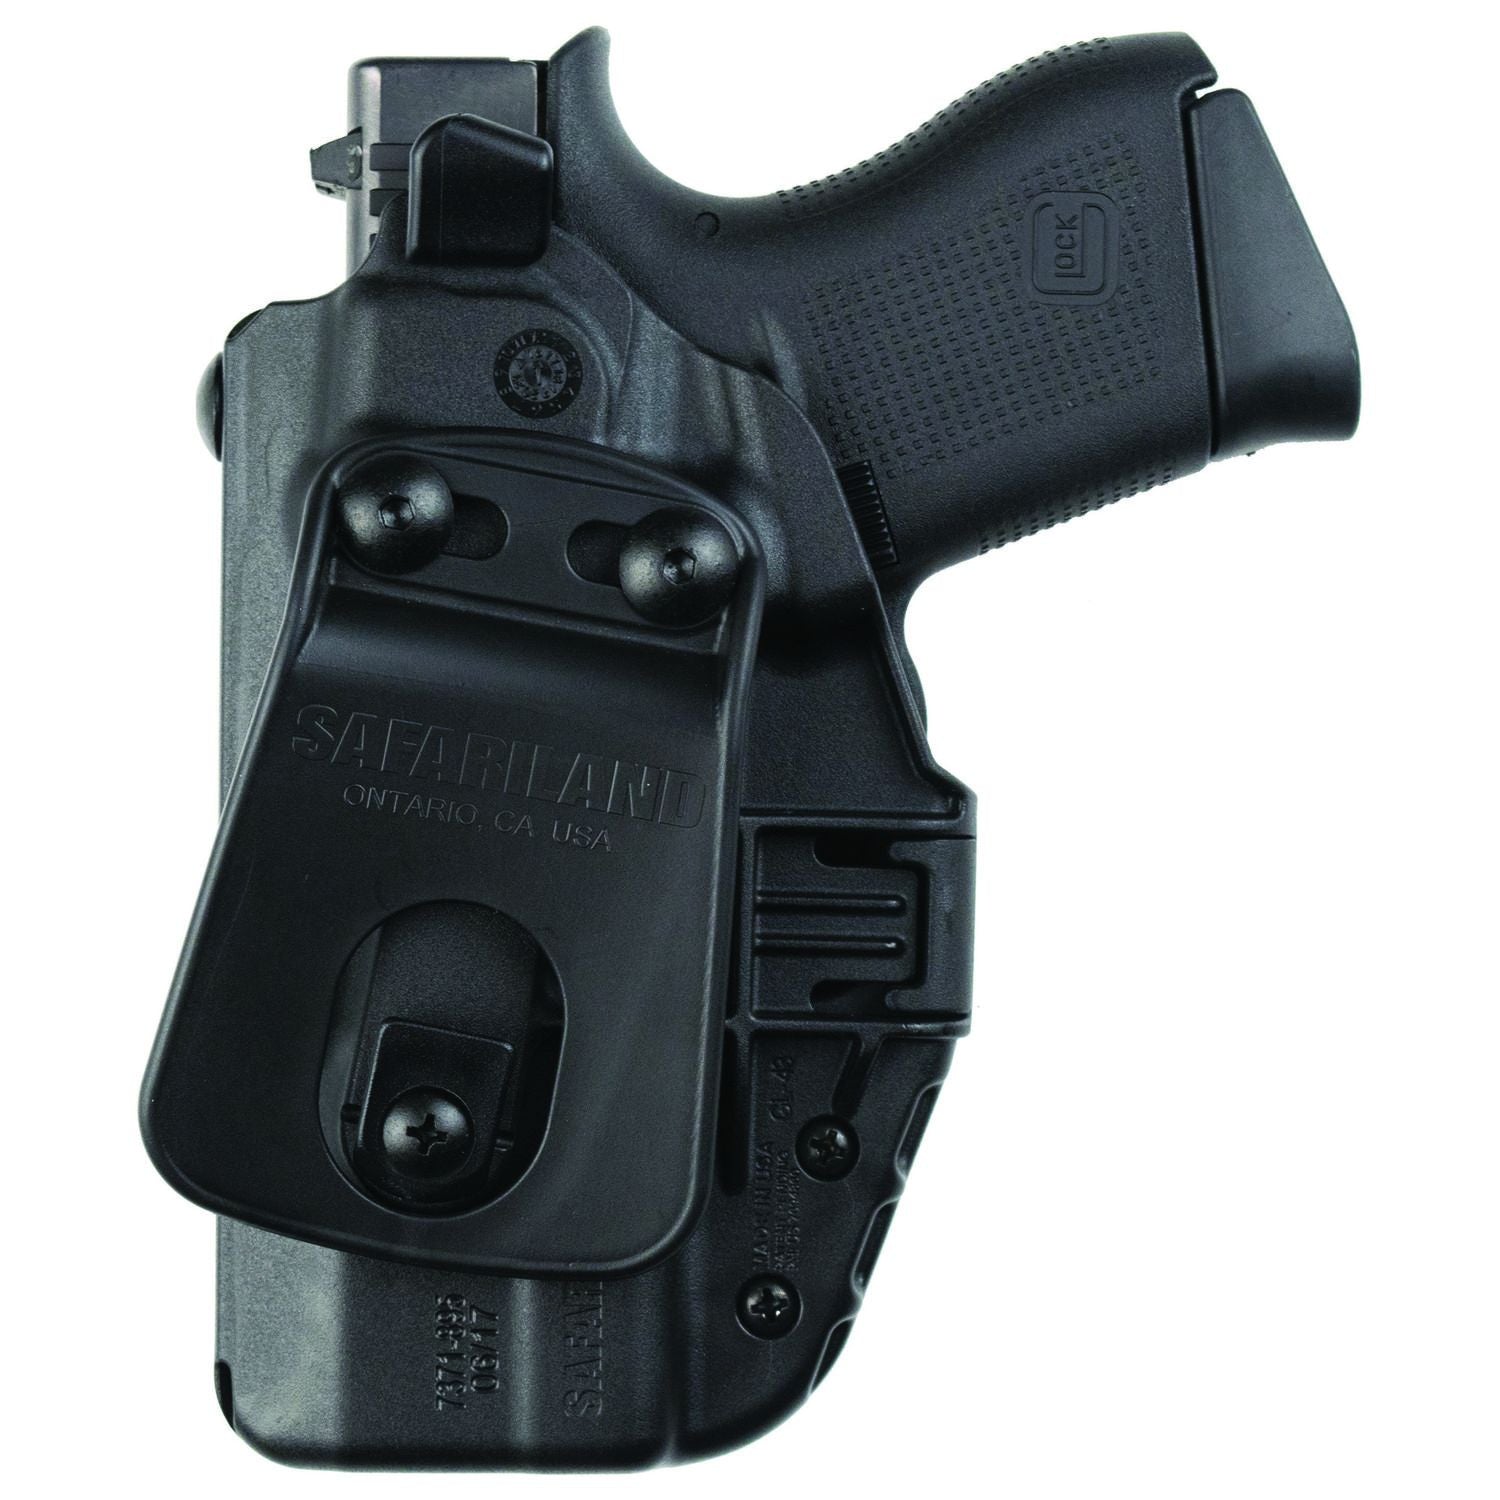 Safariland Model-7371 7TS ALS Open-Top Concealment Paddle Holster without Weapon Light Holsters Safariland Left Tactical Gear Supplier Tactical Distributors Australia